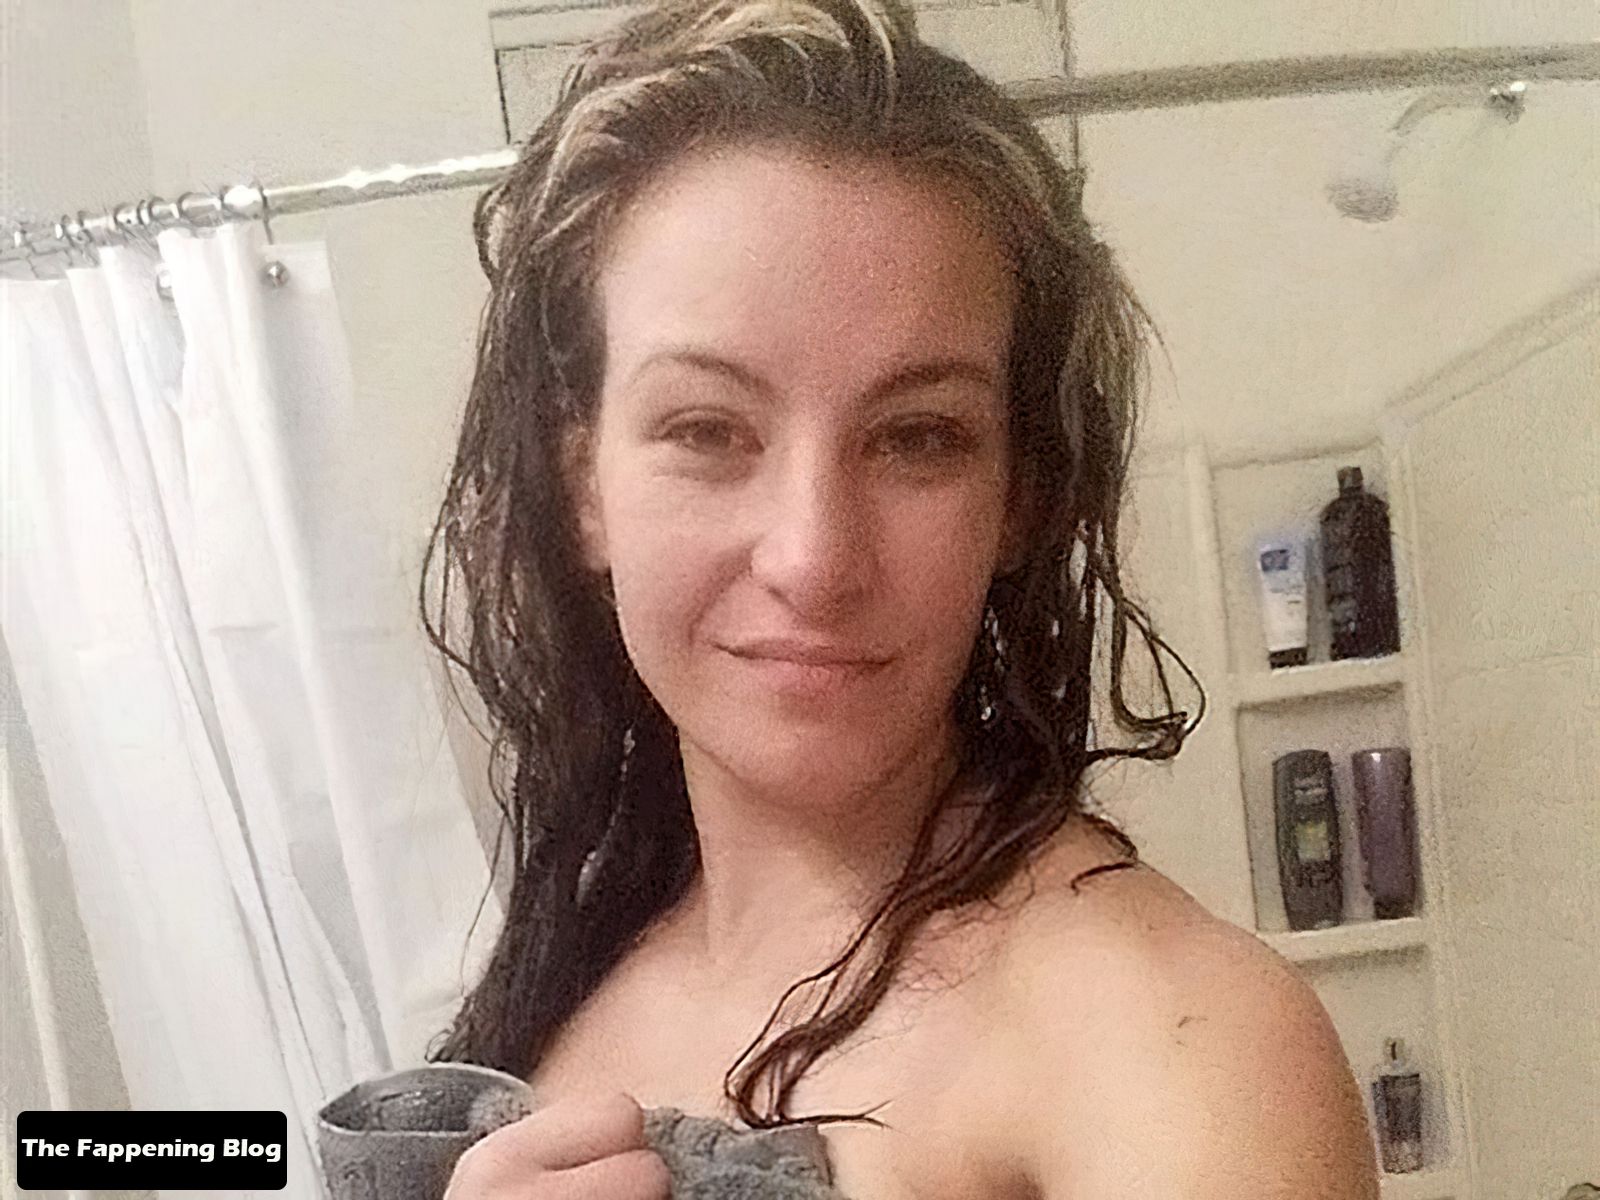 Miesha-Tate-Nude-Leaked-The-Fappening-Sexy-Collection-The-Fappening-Blog-36.jpg